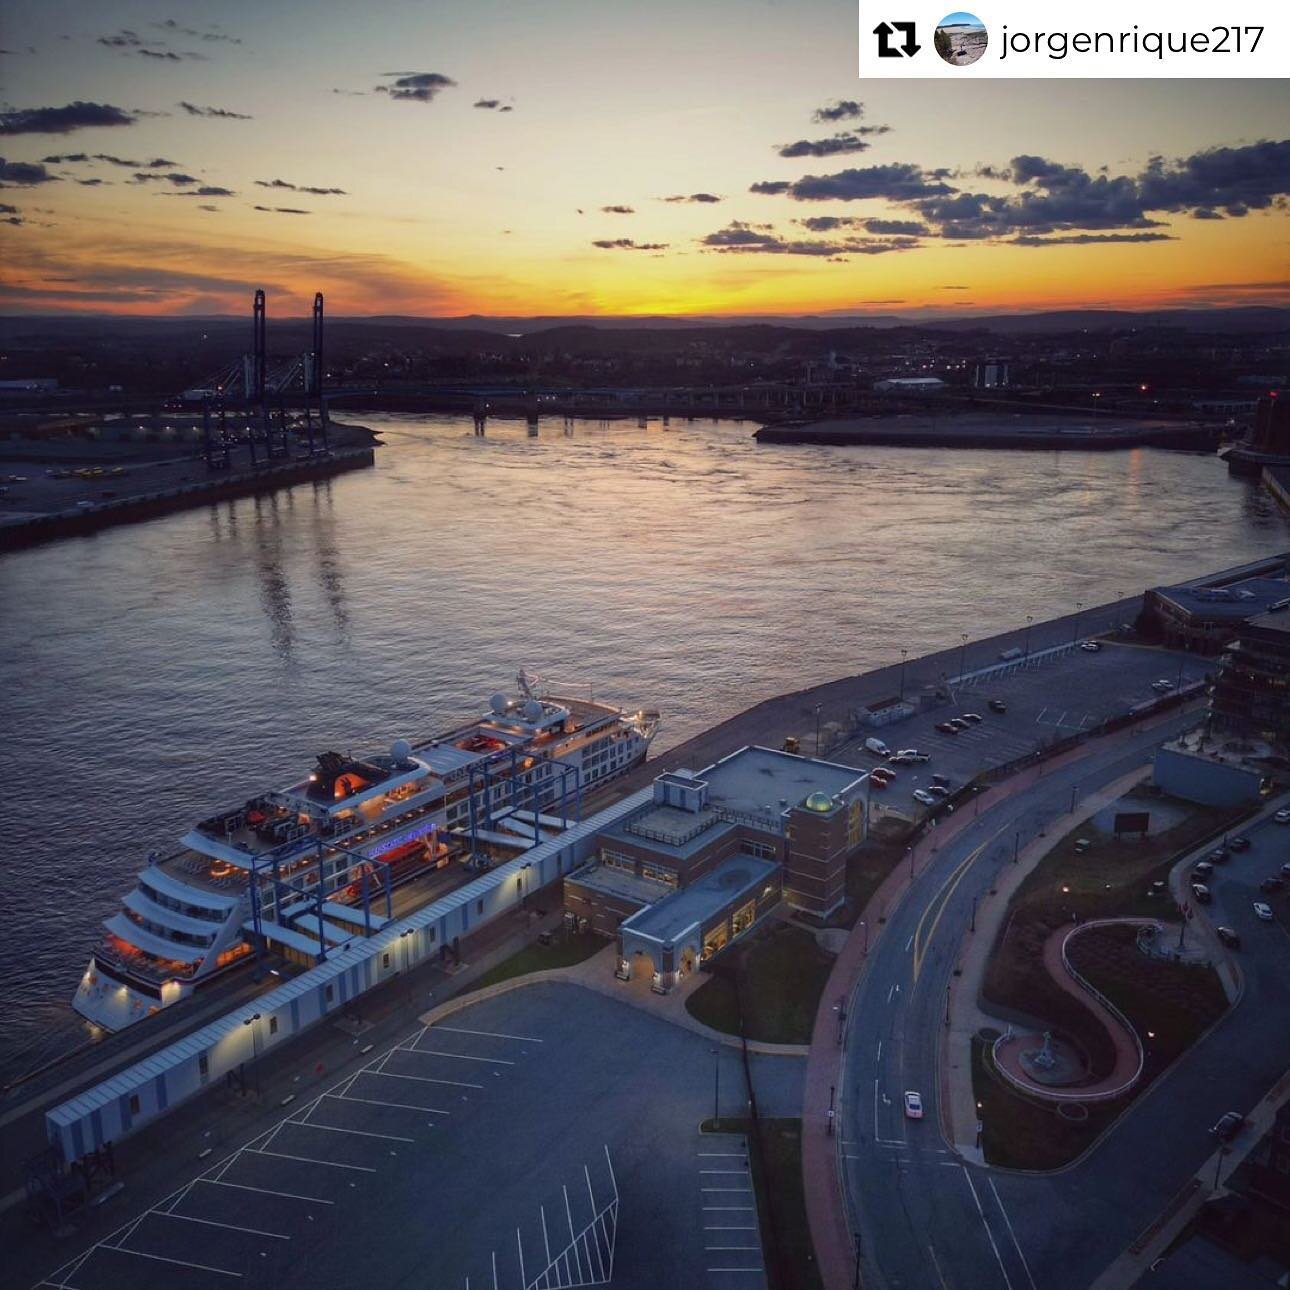 Those Saint John sunsets 😍

Cruise season is here at Port Saint John! What are you waiting for, get your Canada New England cruise booked today! 

See you soon for Bay of Fundy adventures! 

📸 @jorgenrique217 

-
 #cruisetravel #cruise #cruiselife 